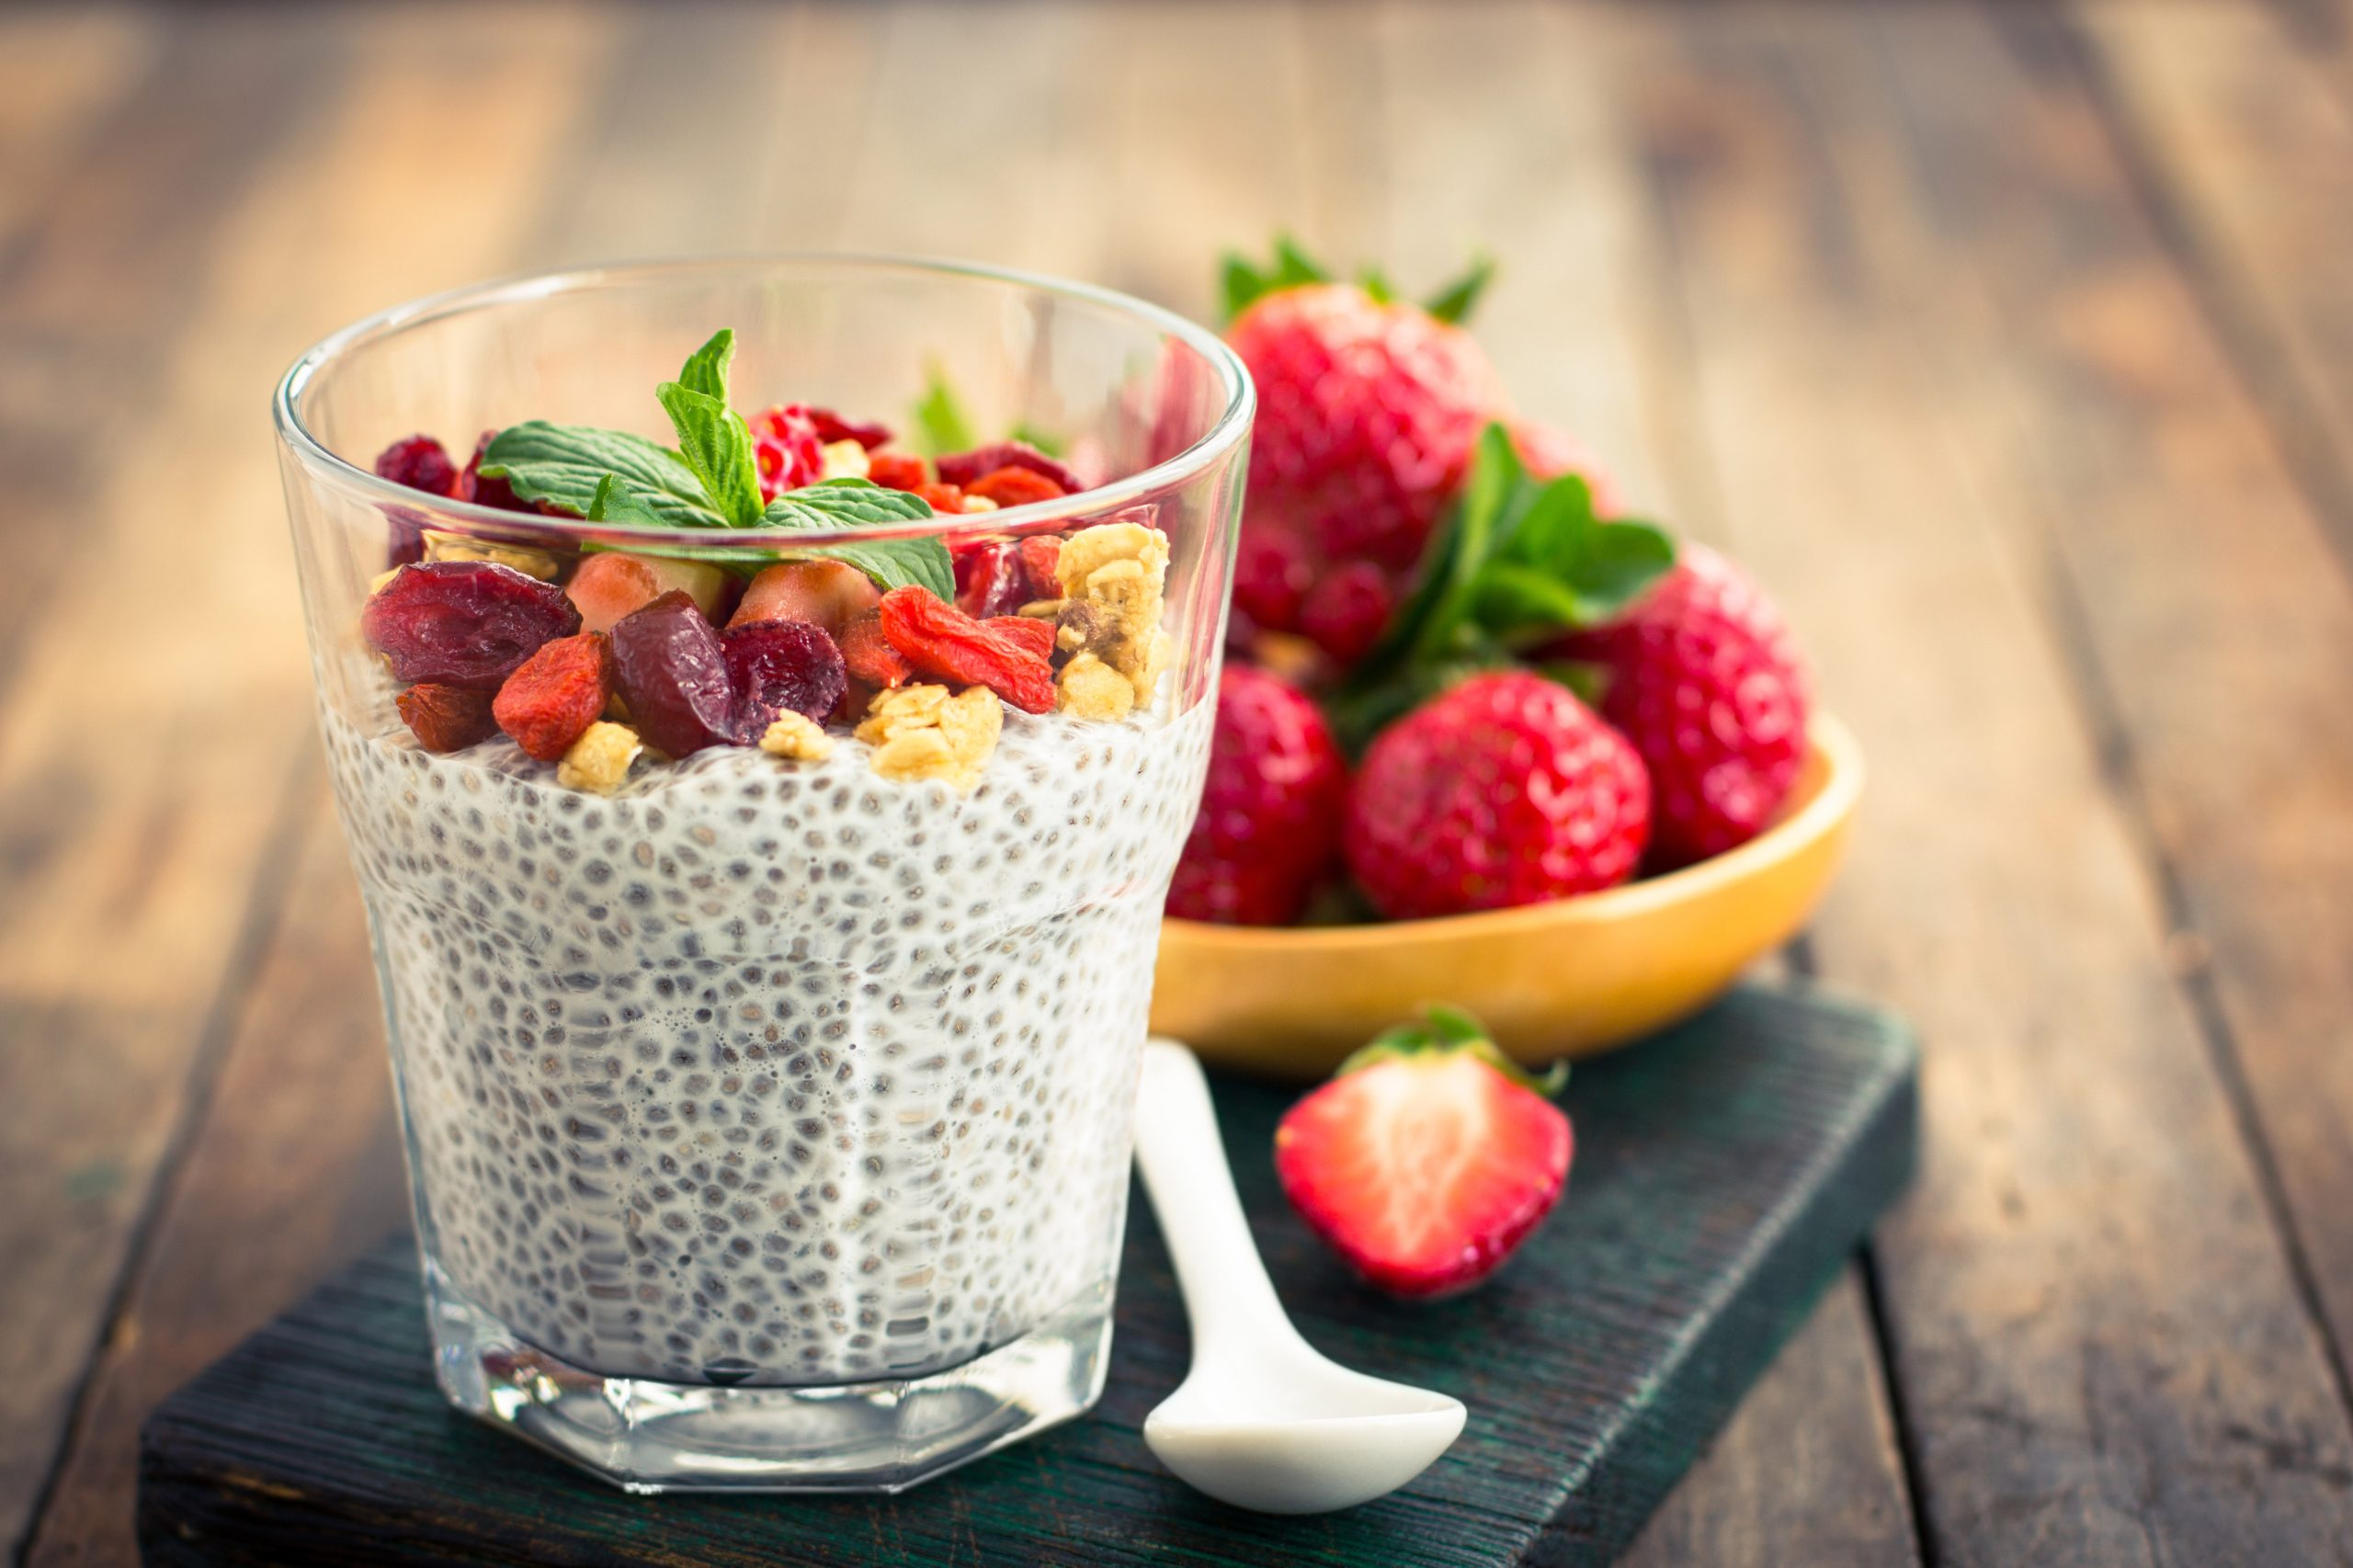 Healthy Chia seed pudding with strawberries, cranberries, and goji berries 